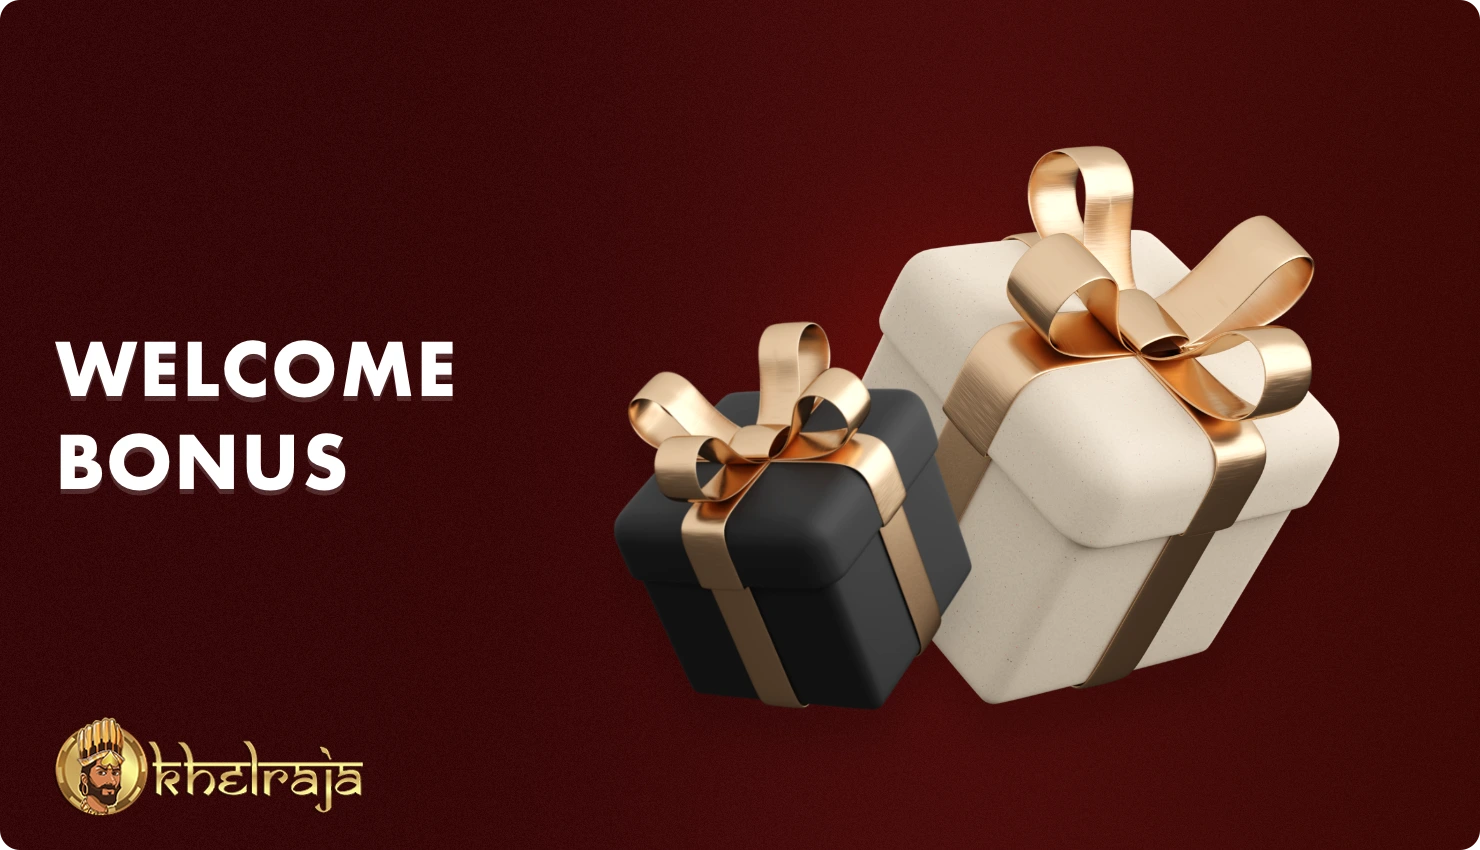 Khelraja Welcome Bonus allows players from India to get an extra bonus for betting and playing in the casino